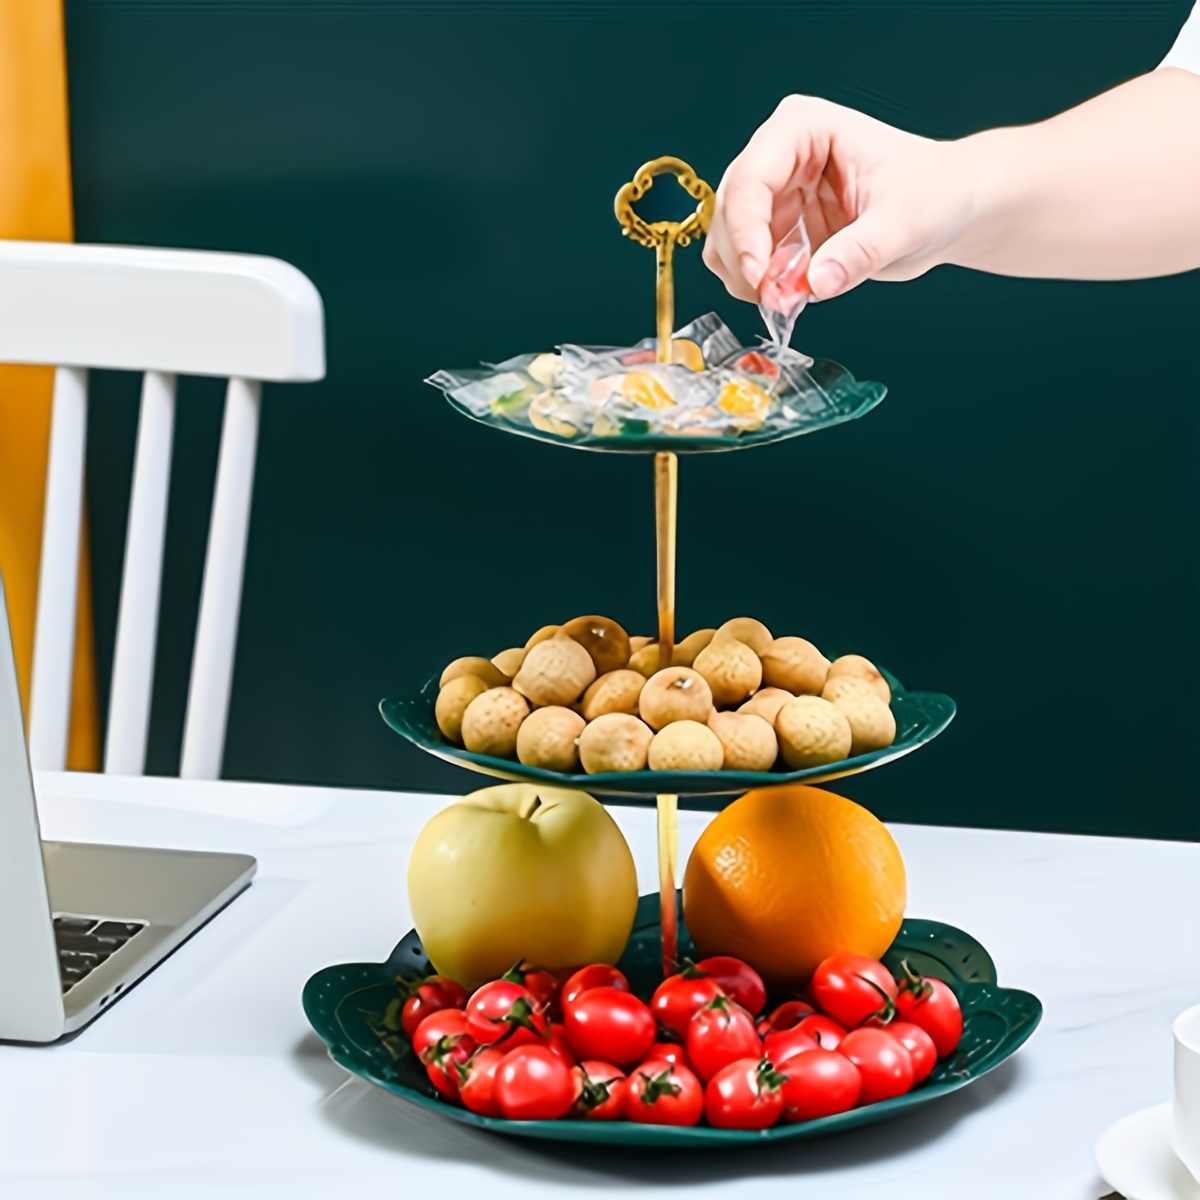 

3-tier Plastic Dessert Stand - Perfect For Birthday Parties, Afternoon Tea & Snacks | Durable Fruit & Cake Display Tray Edible Cake Decorations Cake Stands For Displaying Table